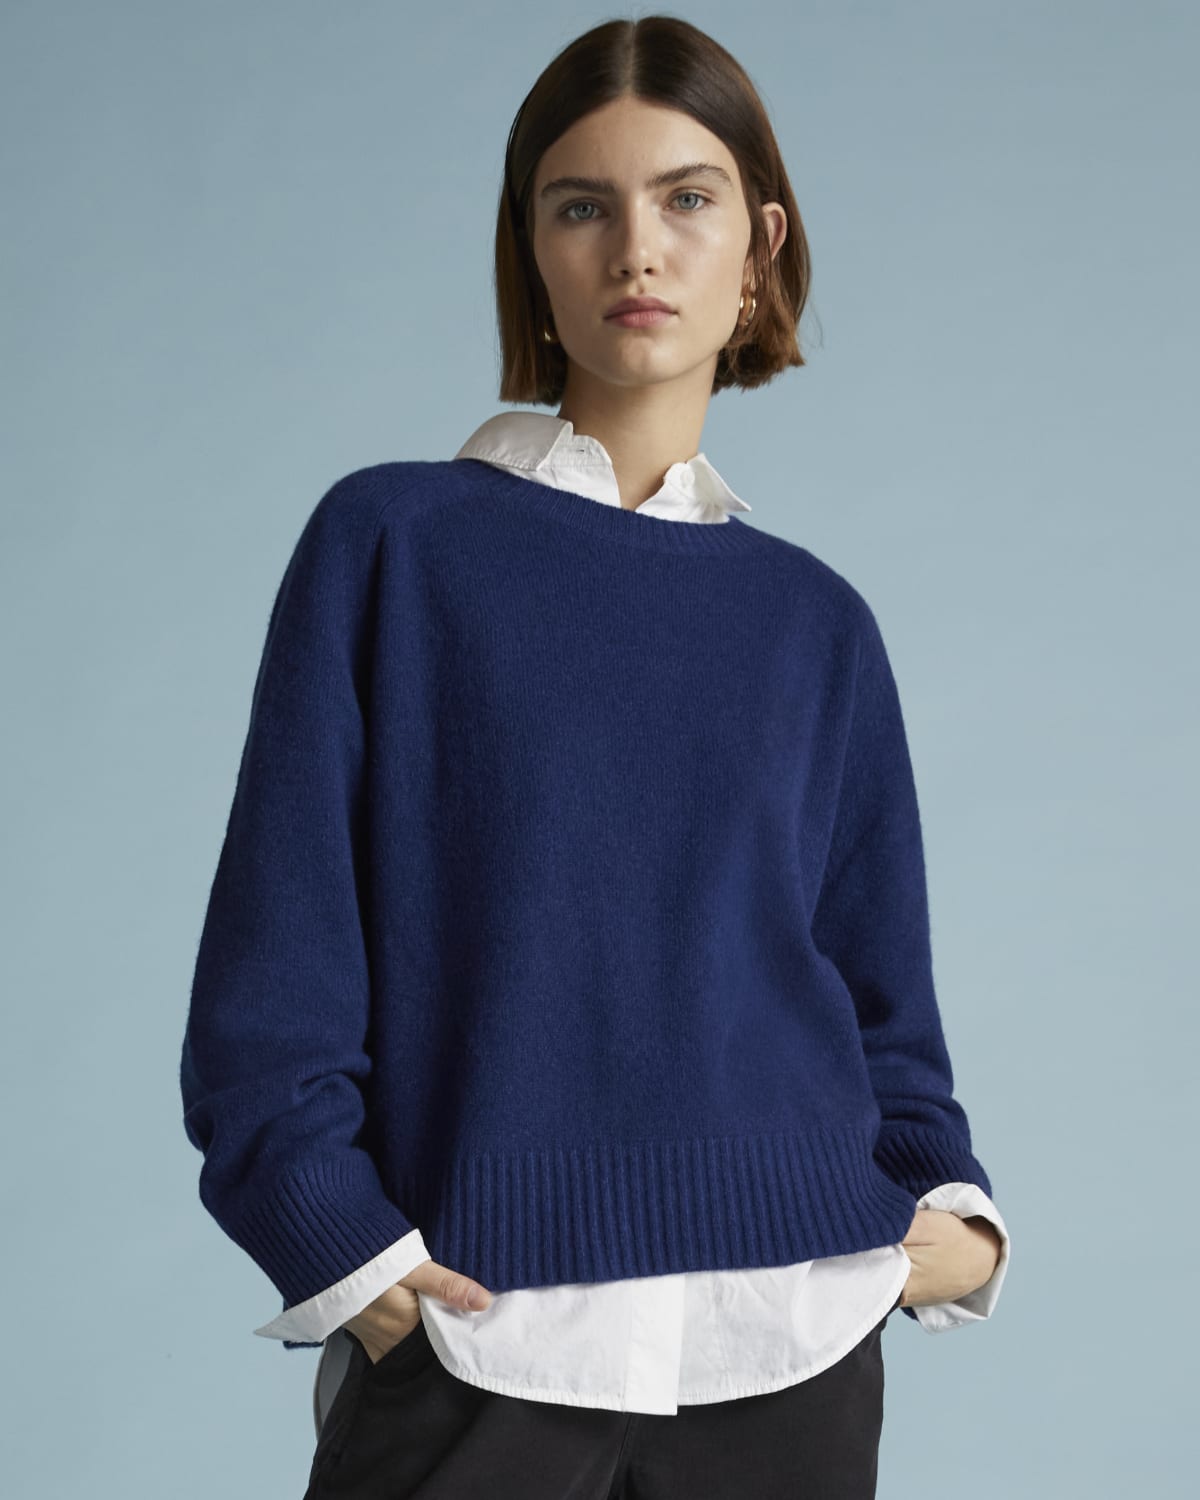 VOIEBIT Synthetic Soft Round Sweater in Navy Blue Womens Clothing Jumpers and knitwear Jumpers 